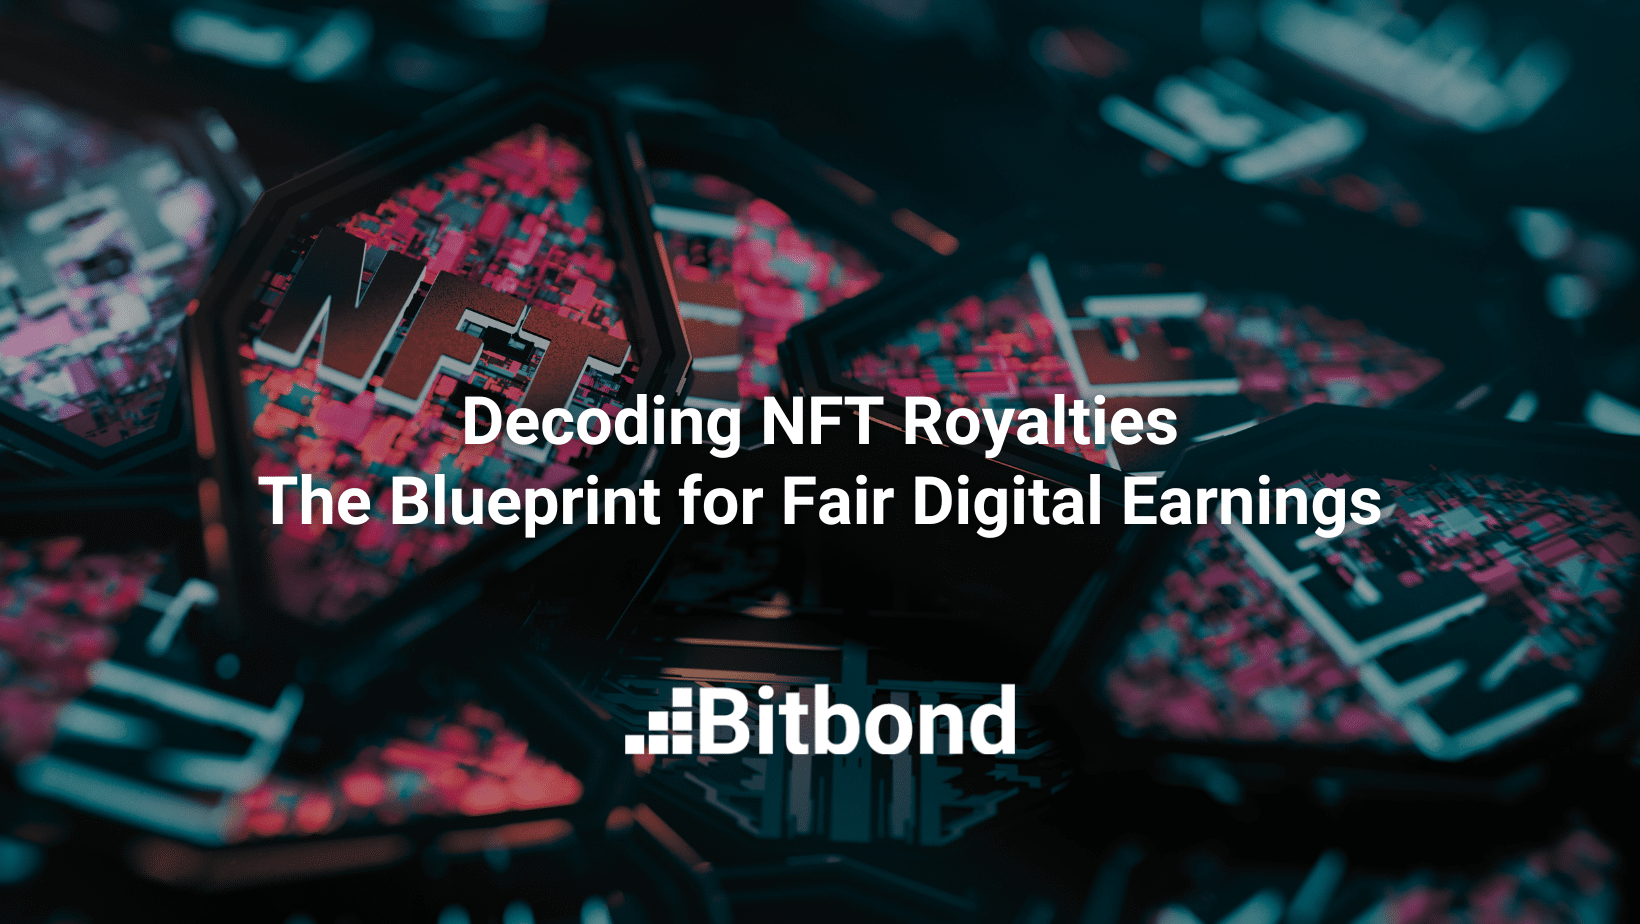 Cover photo for the article Decoding NFT Royalties: The Blueprint for Fair Digital Earnings.